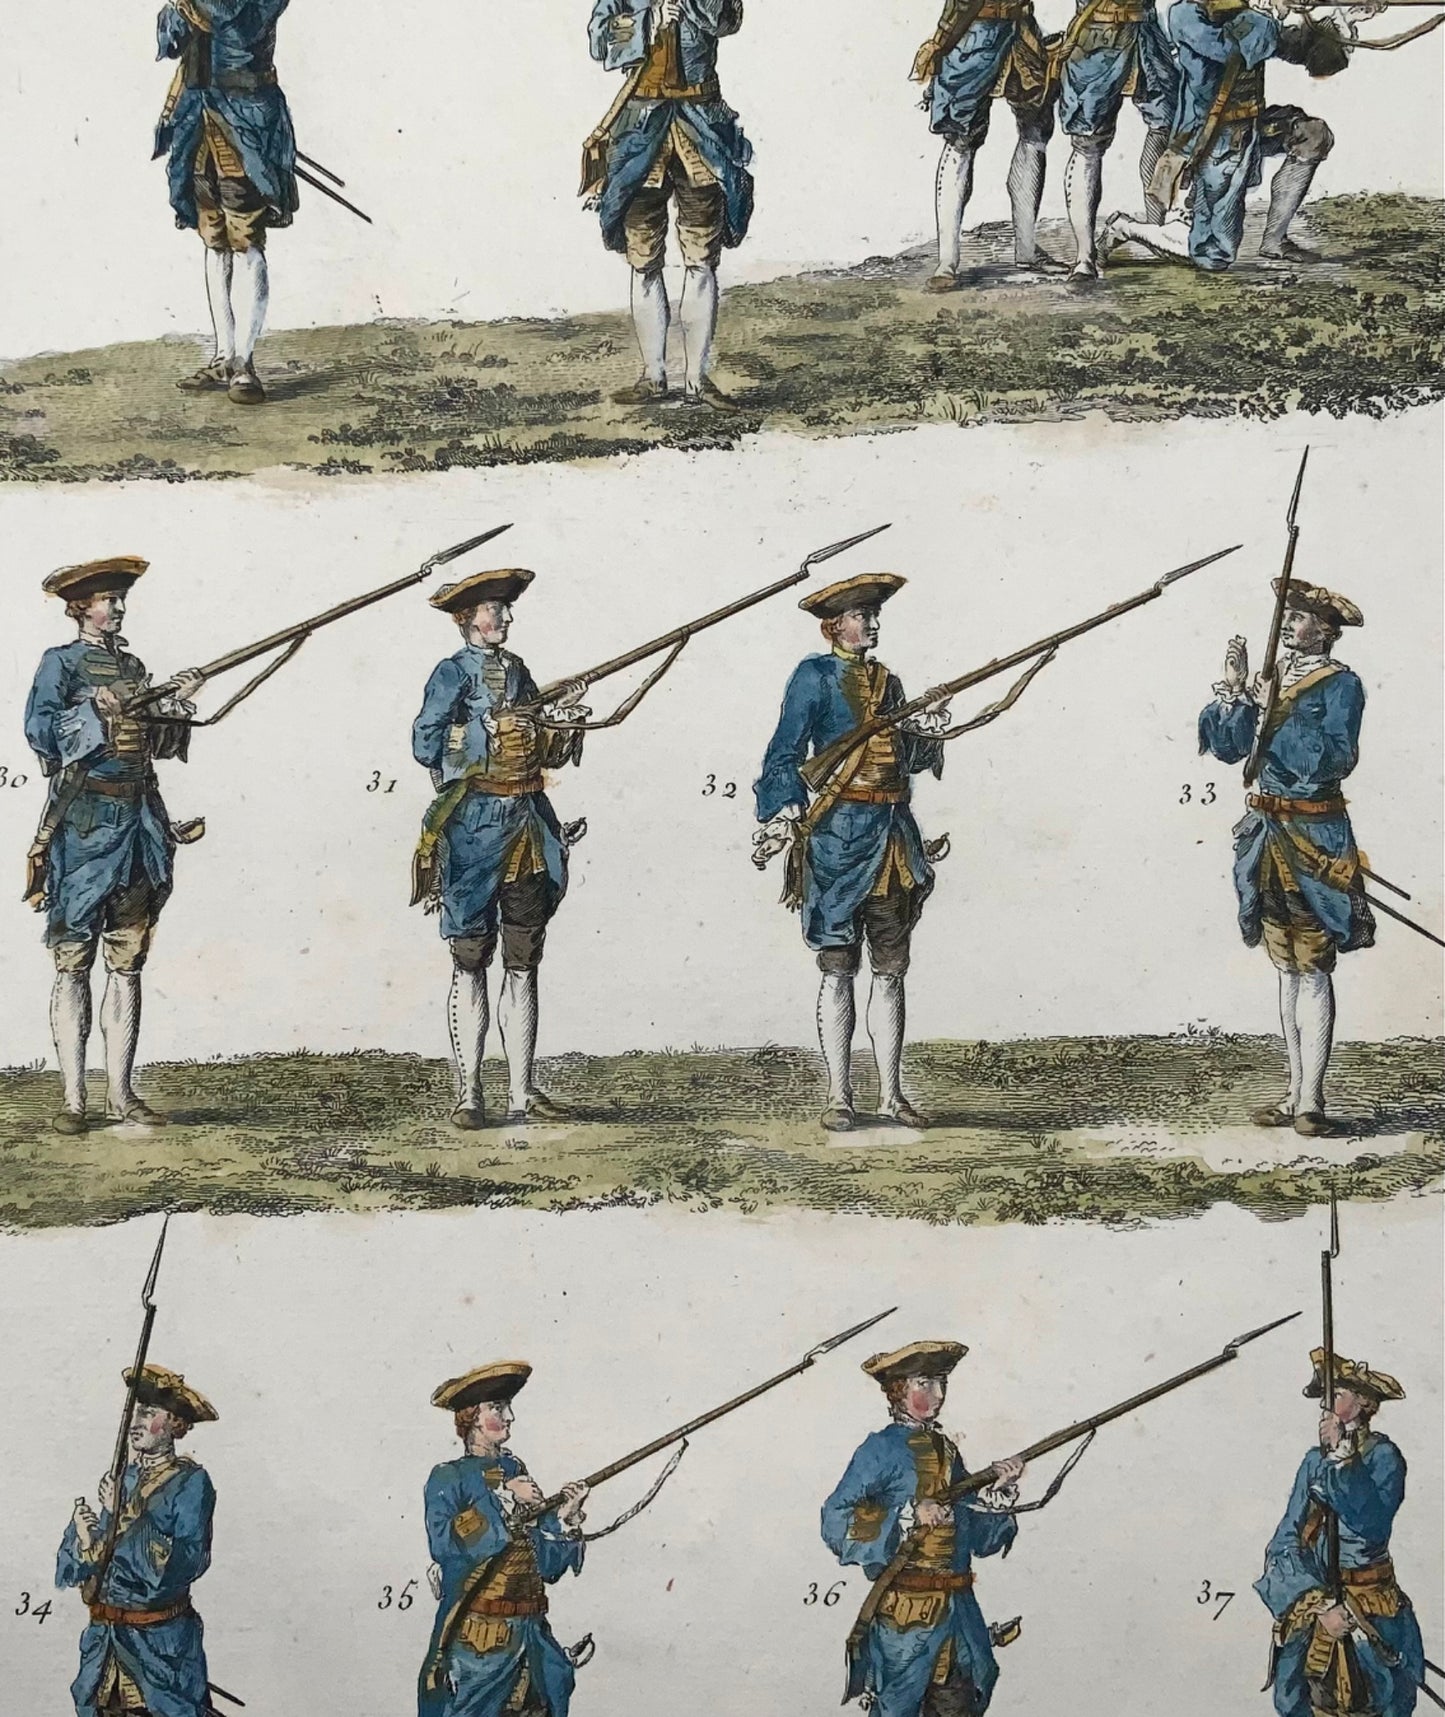 1777 Infantry exercises, large folio, hand coloured, Diderot, military